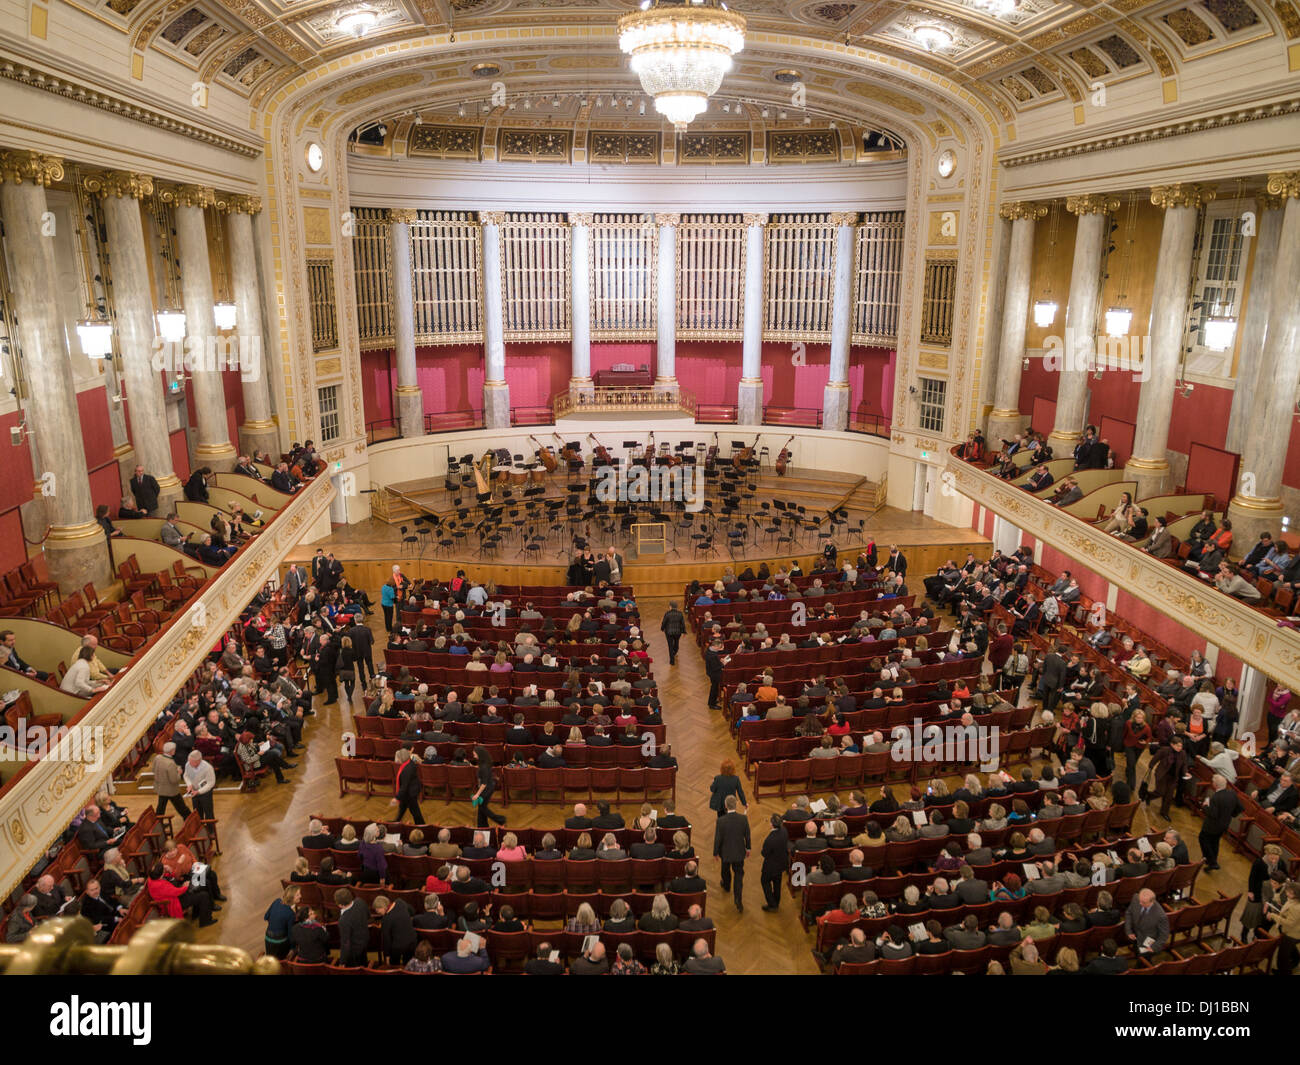 Patrons gather for a Concert at Wiener Konzerthaus. The seats fill up with concert goers but the stage is mostly empty. Stock Photo